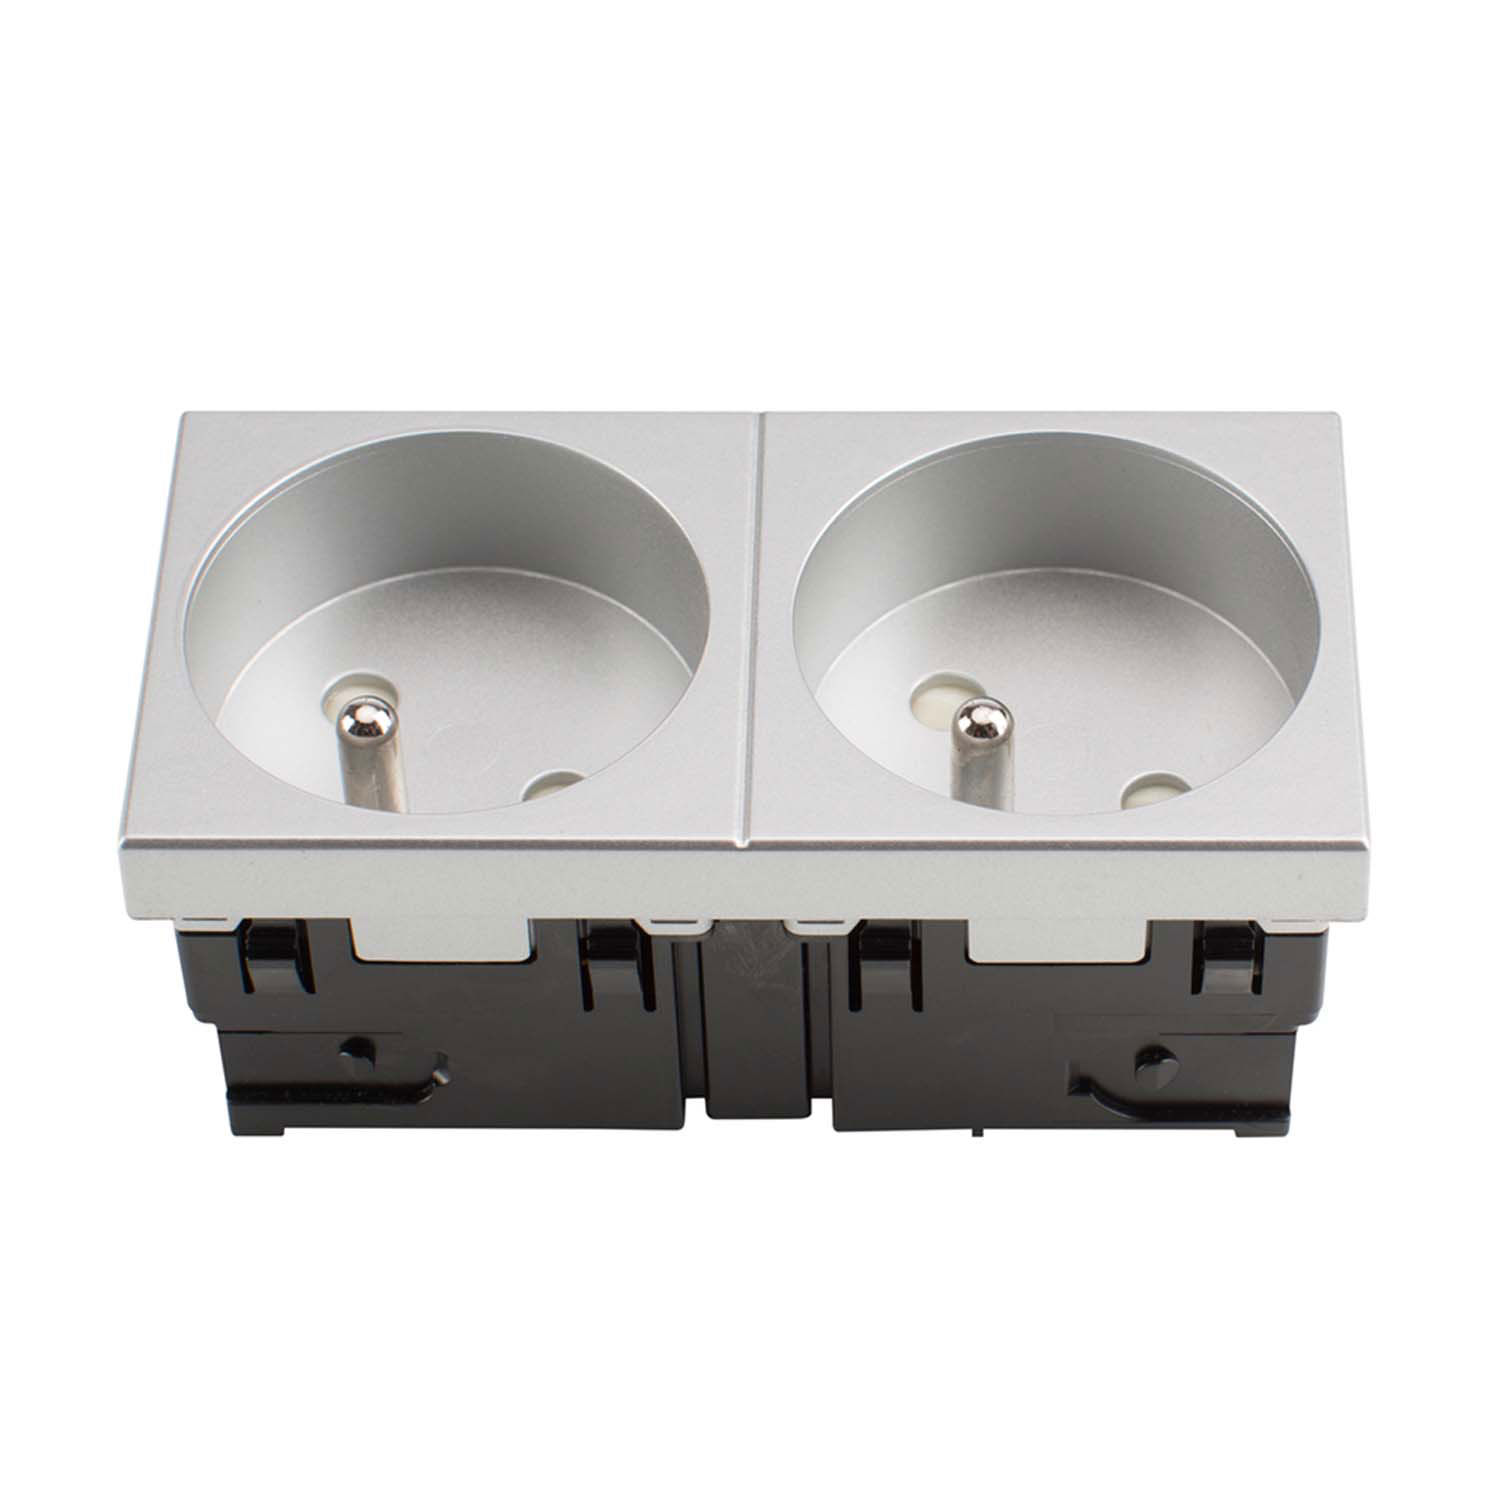 connection-modul version 1 Socket outlet CEE7 / 5 2-fold (French connector), scale: 45x90 mm, plastic, colour: grey